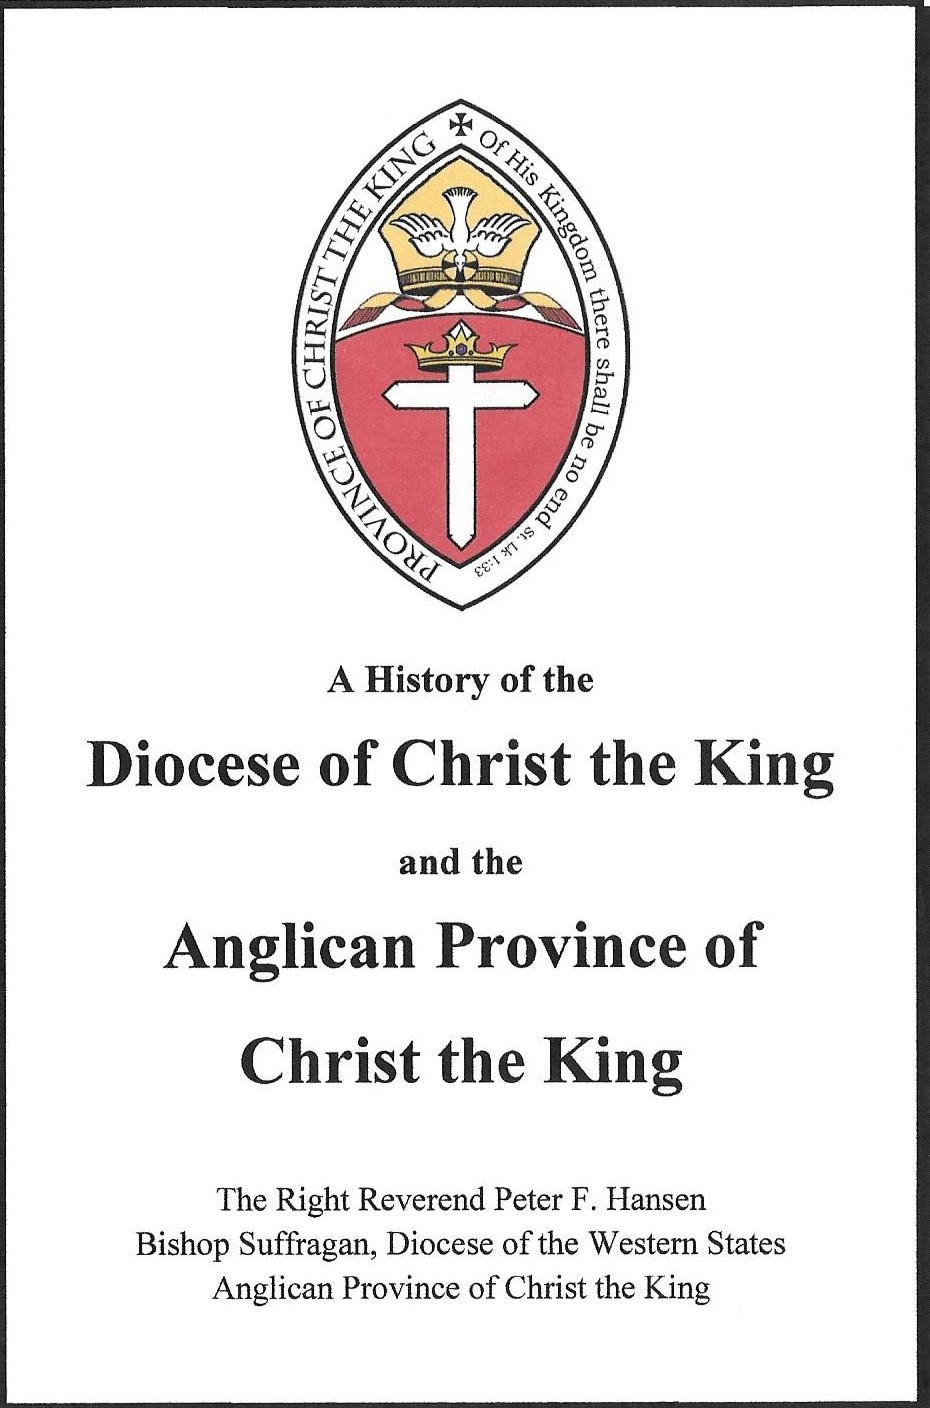 A History of the Diocese of Christ the King